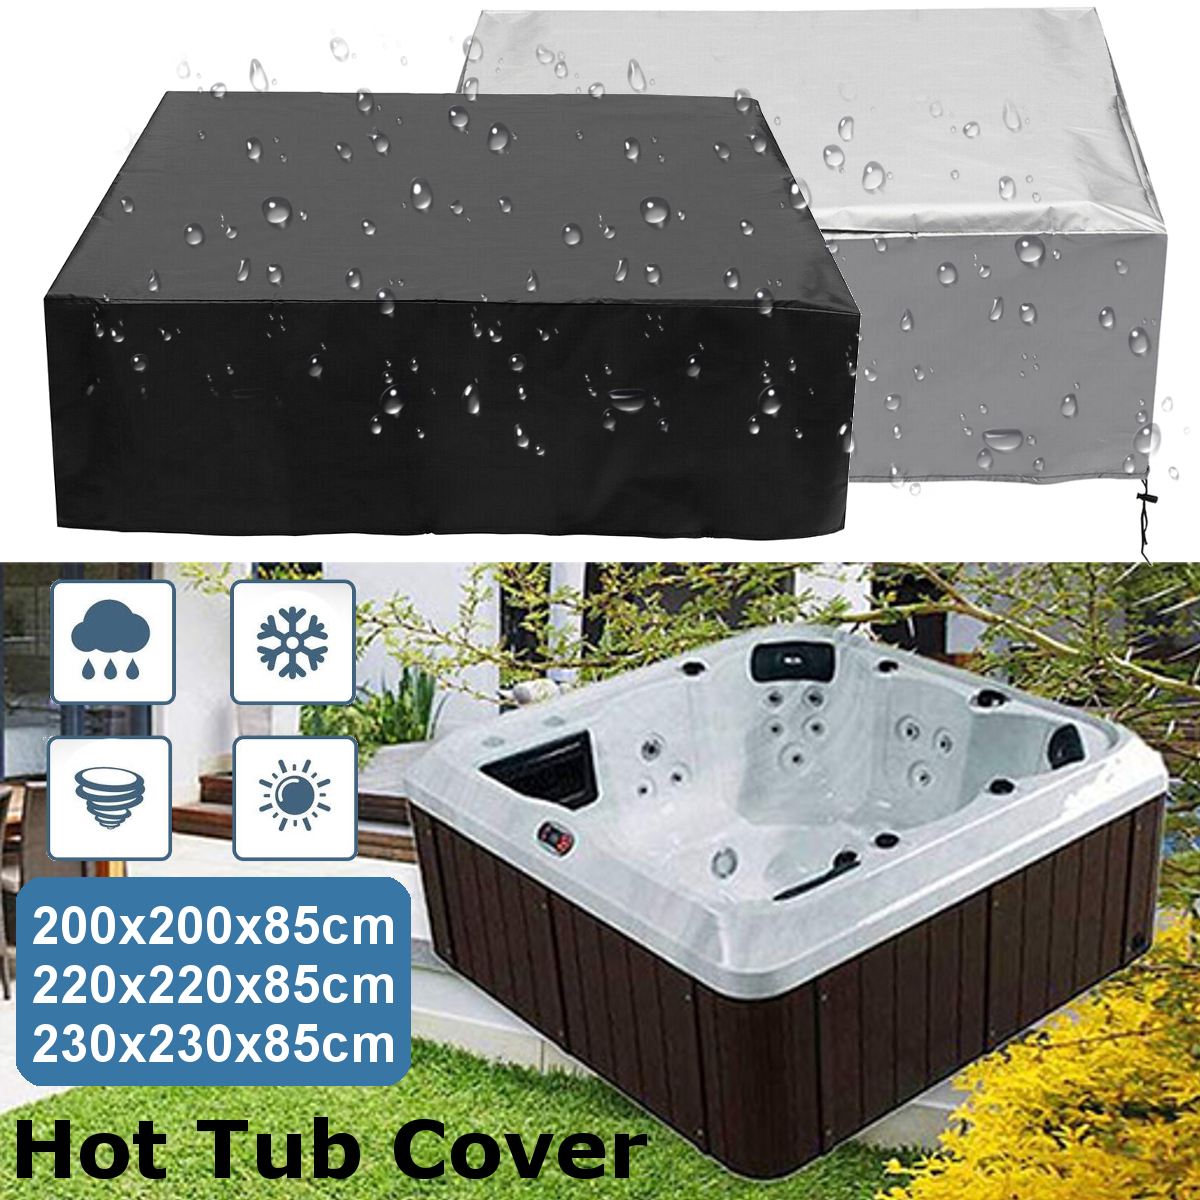 Hot-Tub-Spa-Cover-Cap-Guard-Waterproof-Dust-Protector-Harsh-Weather-1781959-1